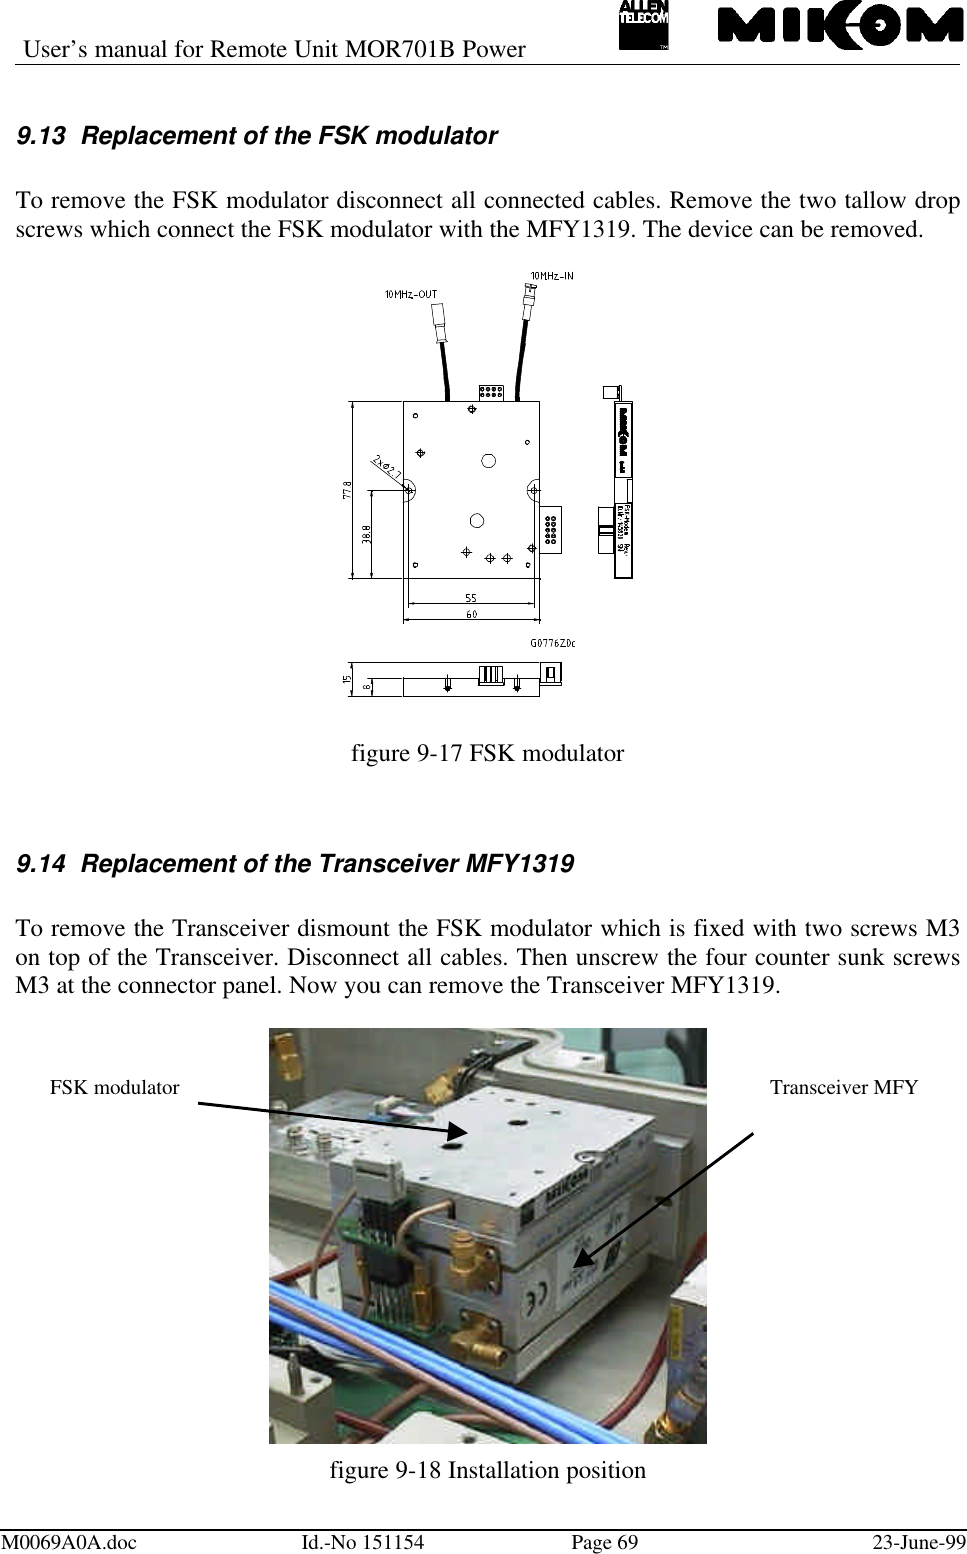 User’s manual for Remote Unit MOR701B PowerM0069A0A.doc Id.-No 151154 Page 69 23-June-999.13 Replacement of the FSK modulatorTo remove the FSK modulator disconnect all connected cables. Remove the two tallow dropscrews which connect the FSK modulator with the MFY1319. The device can be removed.figure 9-17 FSK modulator9.14 Replacement of the Transceiver MFY1319To remove the Transceiver dismount the FSK modulator which is fixed with two screws M3on top of the Transceiver. Disconnect all cables. Then unscrew the four counter sunk screwsM3 at the connector panel. Now you can remove the Transceiver MFY1319.figure 9-18 Installation positionTransceiver MFYFSK modulator